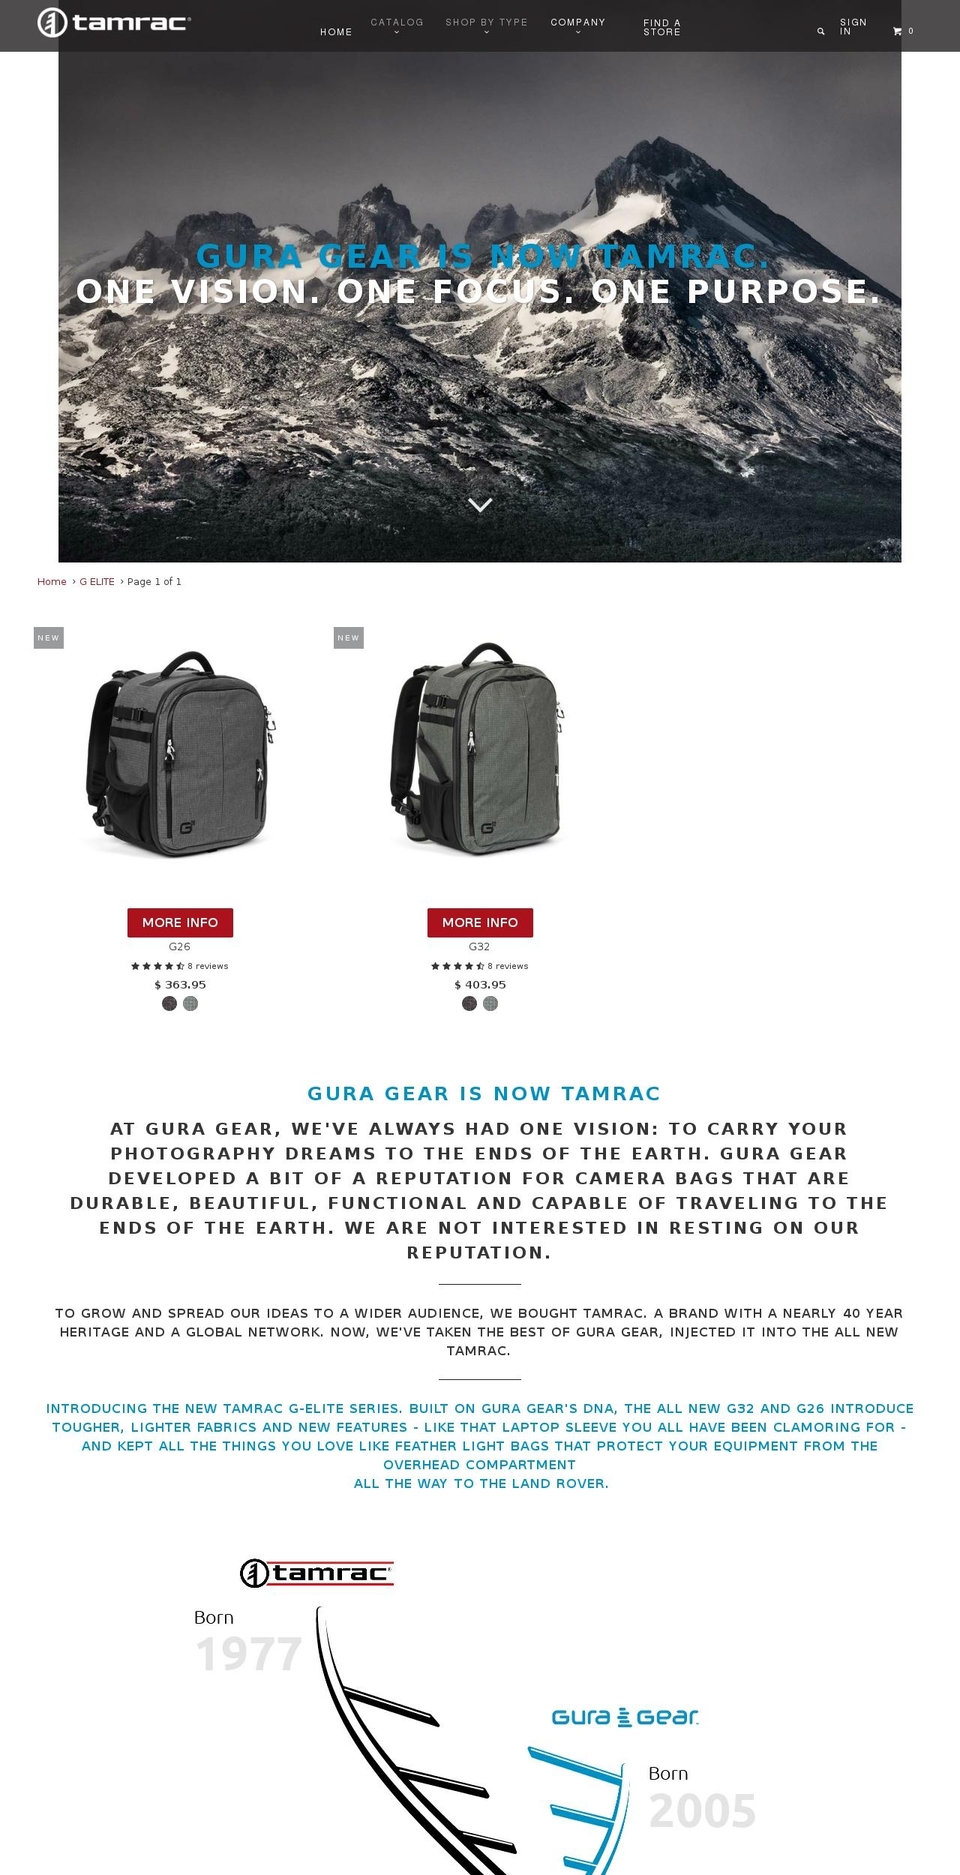 Be Yours Shopify theme site example guragear.com